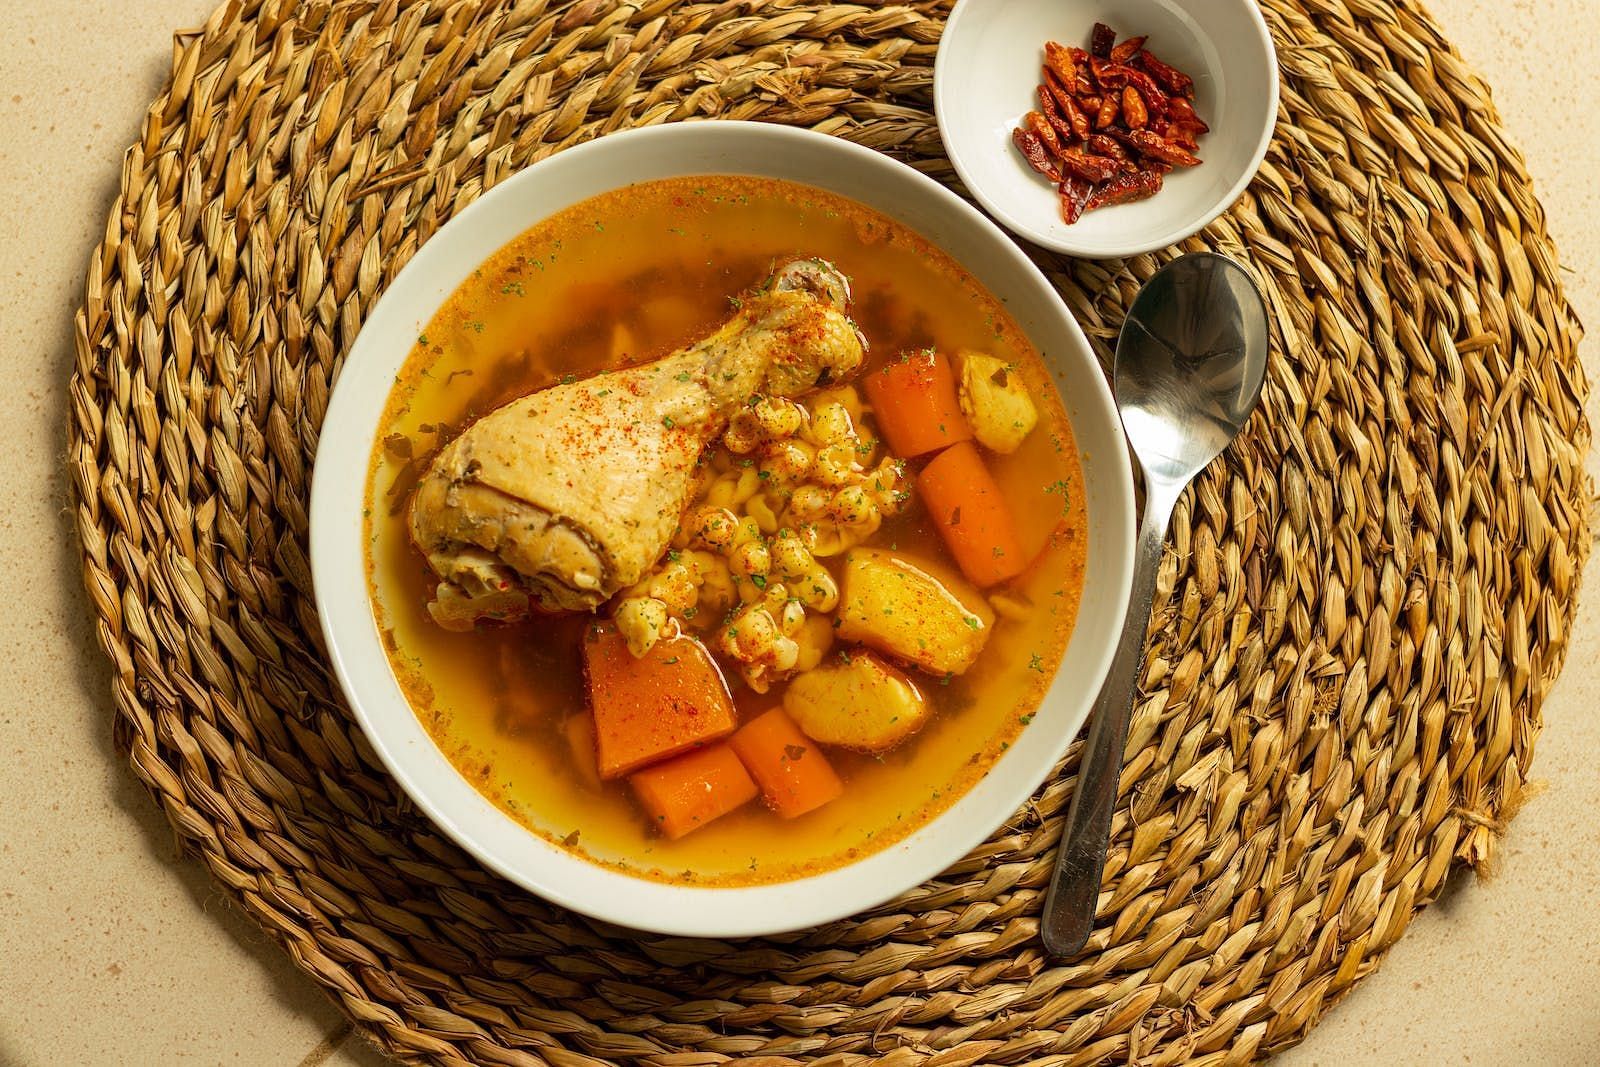 Healthy chicken and fresh vegetable soup (Image source: Pexels)